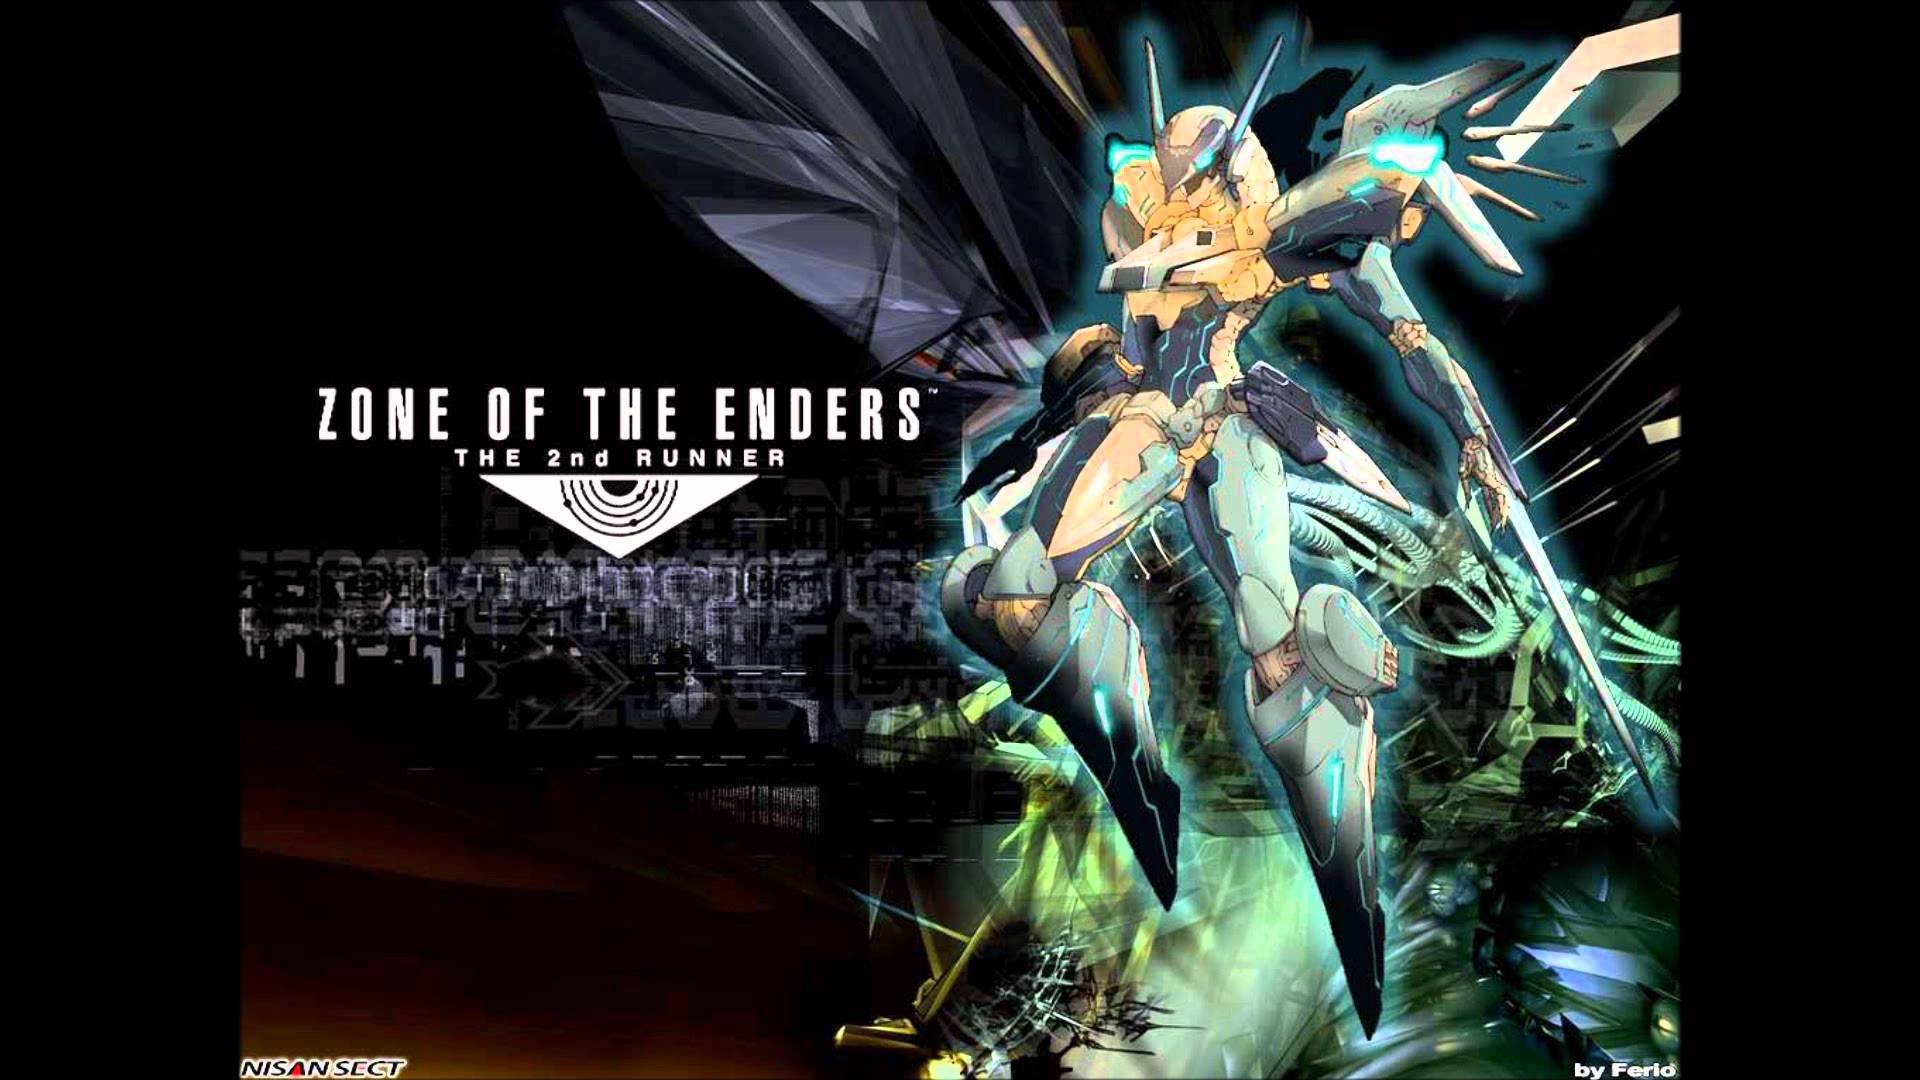 zone of the enders wallpaper,cg artwork,graphic design,fictional character,darkness,mythology